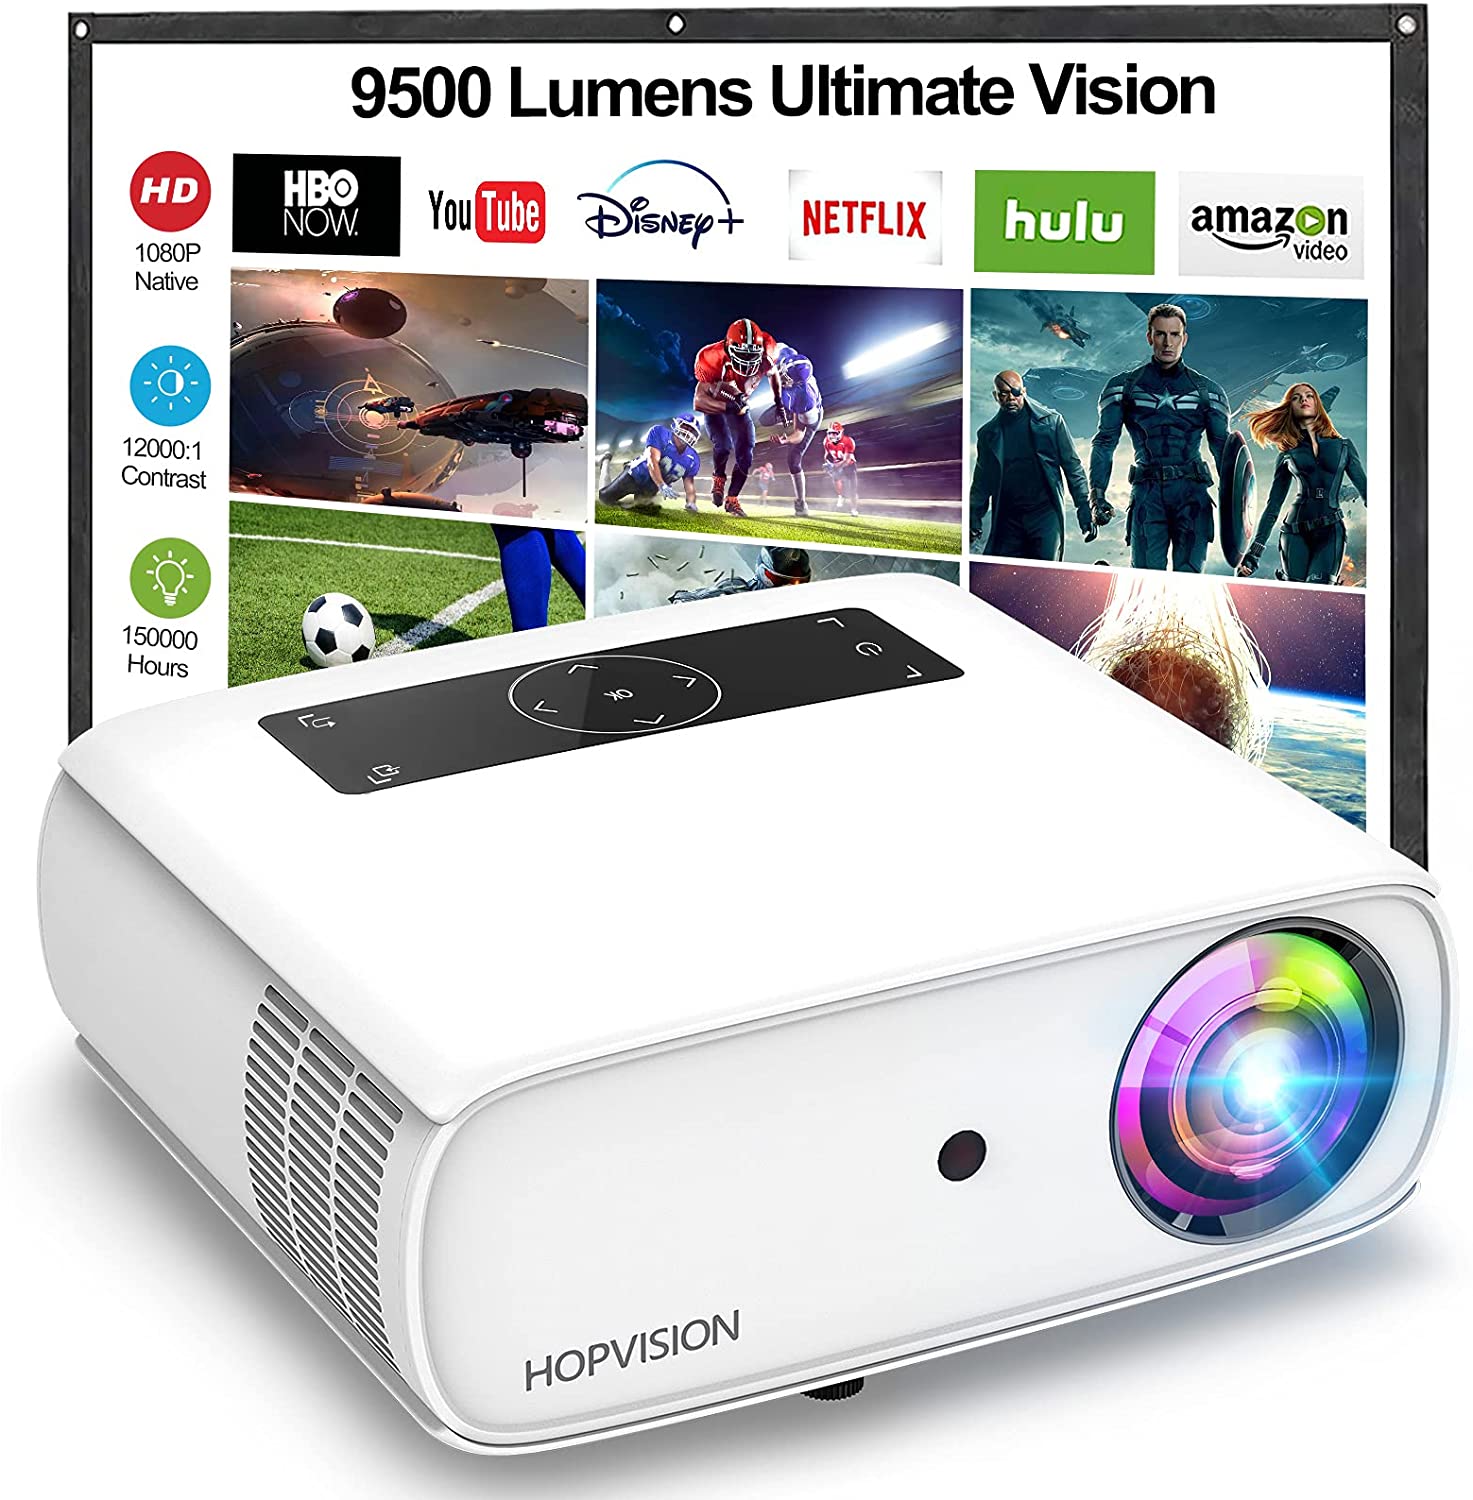 3. HOPVISION Native 1080P Projector: